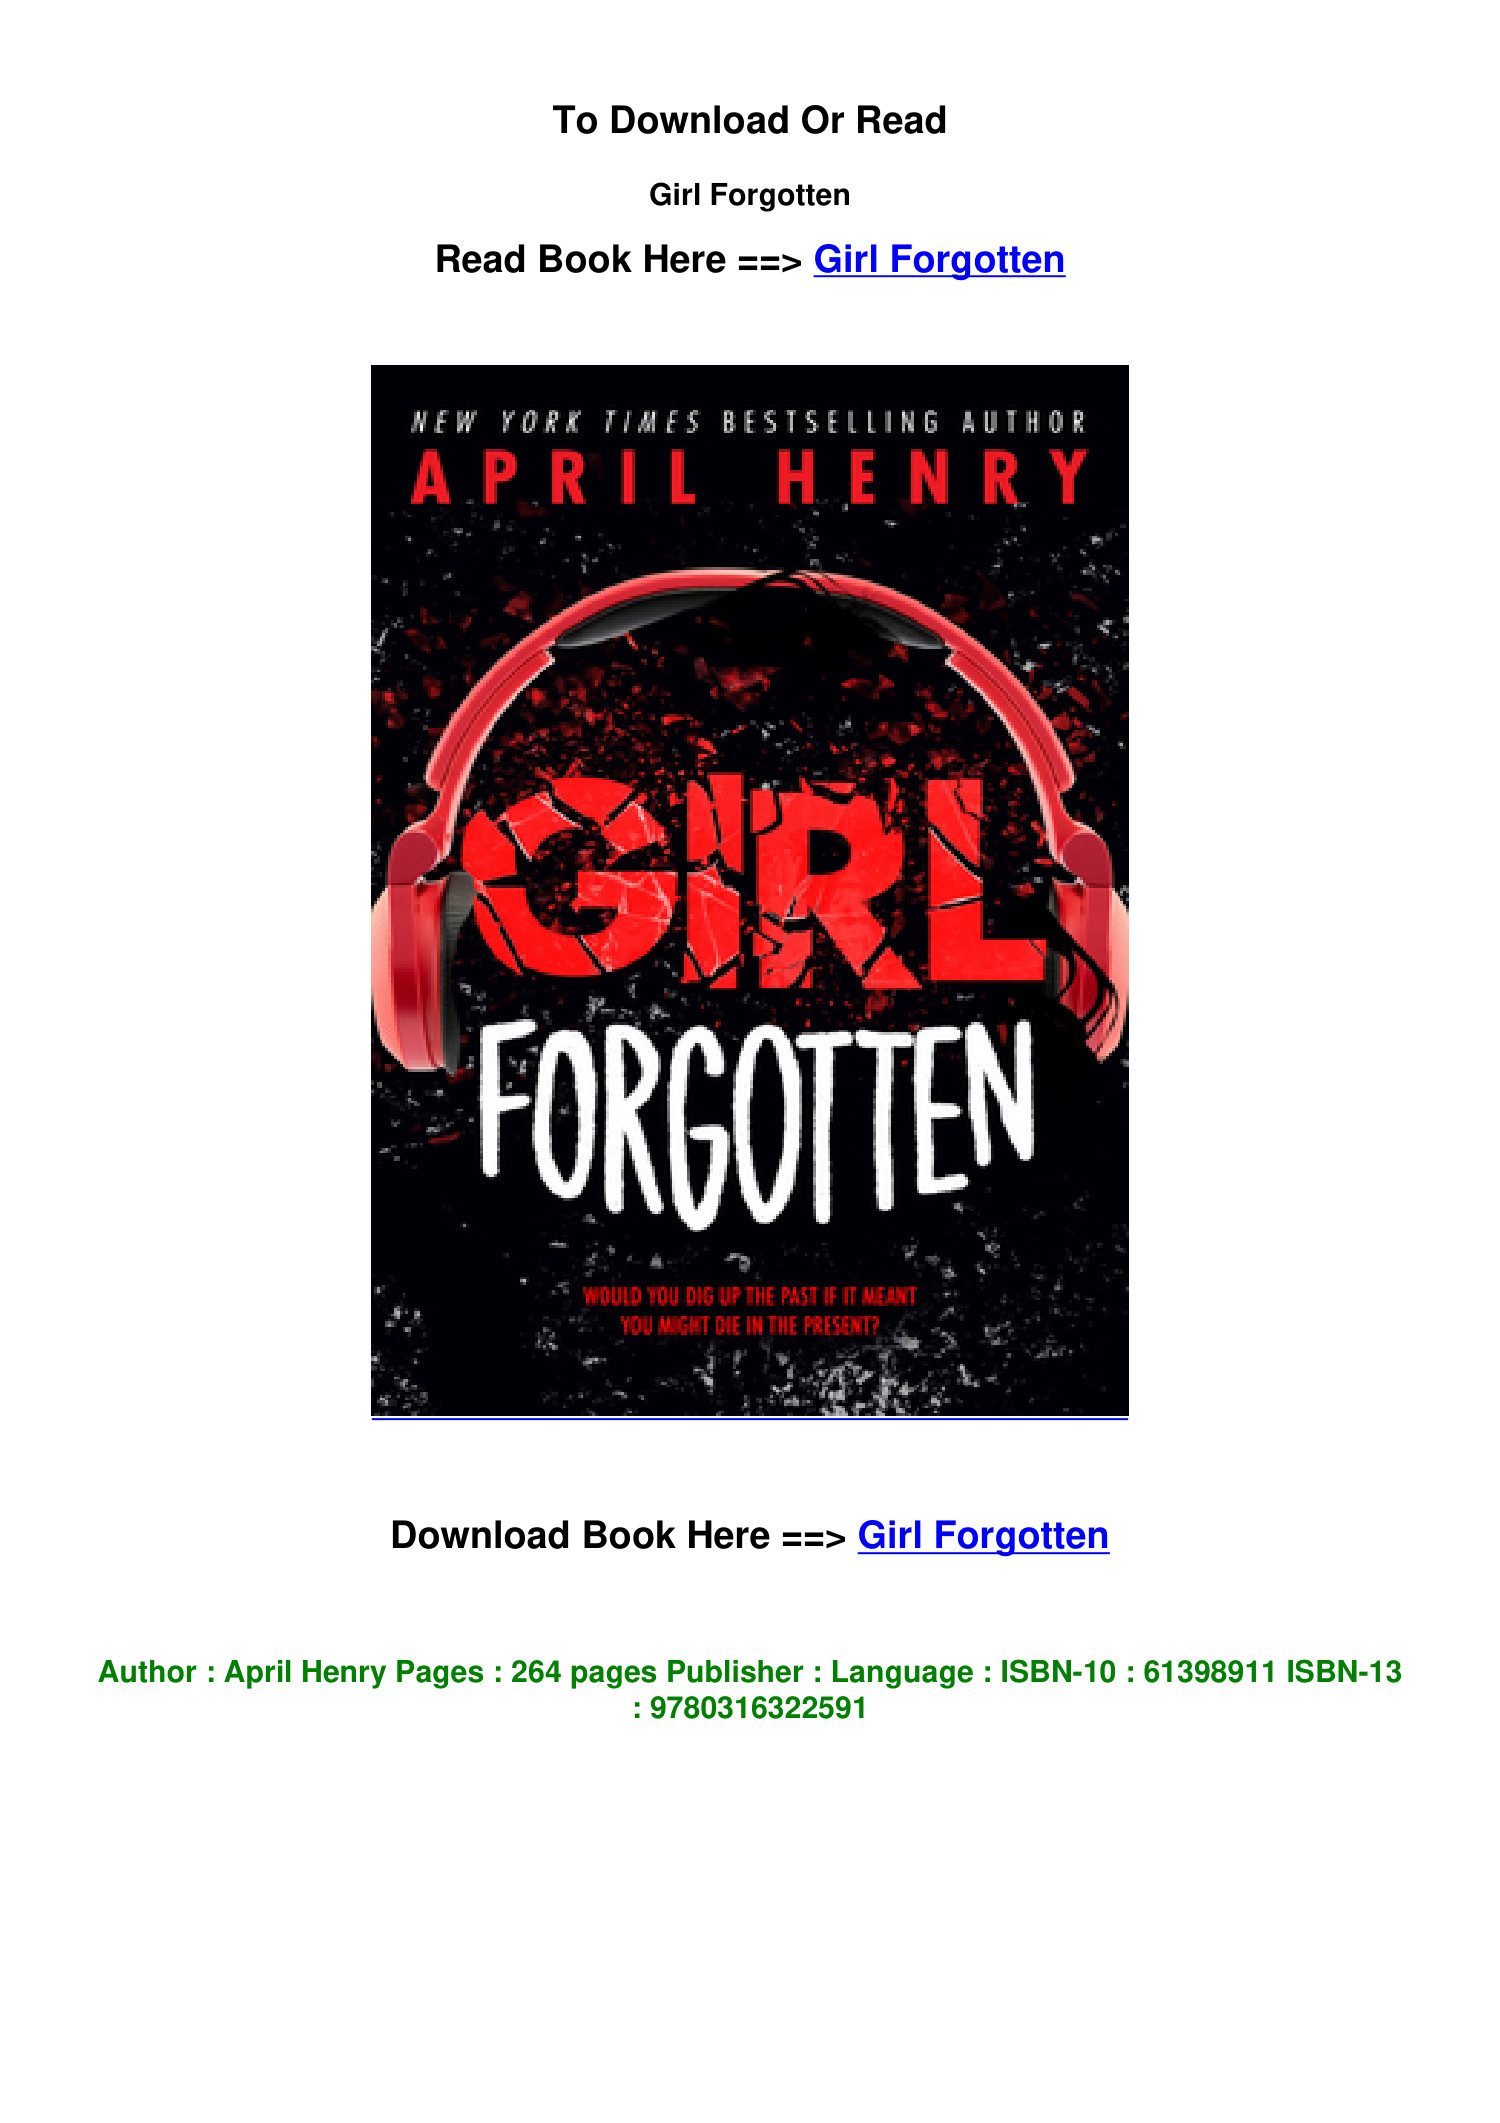 DOWNLOAD EPUB Girl Forgotten by April Henry.pdf | DocDroid